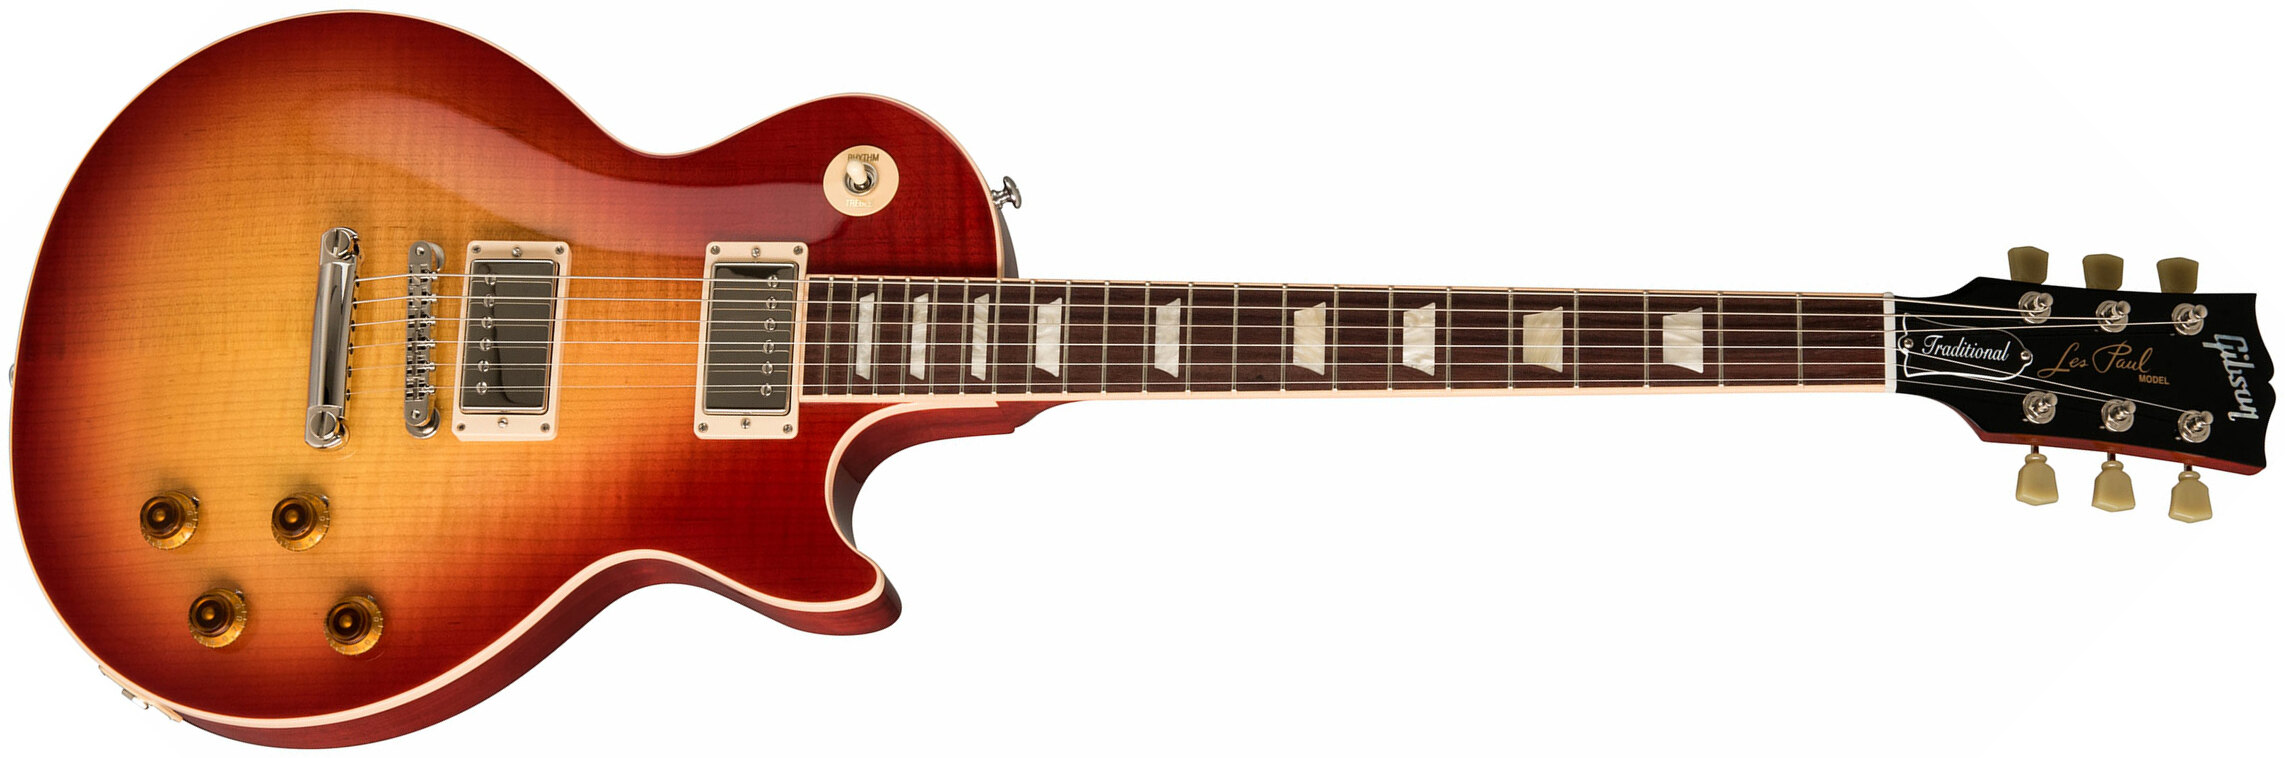 Gibson Les Paul Traditional 2019 2h Ht Rw - Heritage Cherry Sunburst - Single cut electric guitar - Main picture